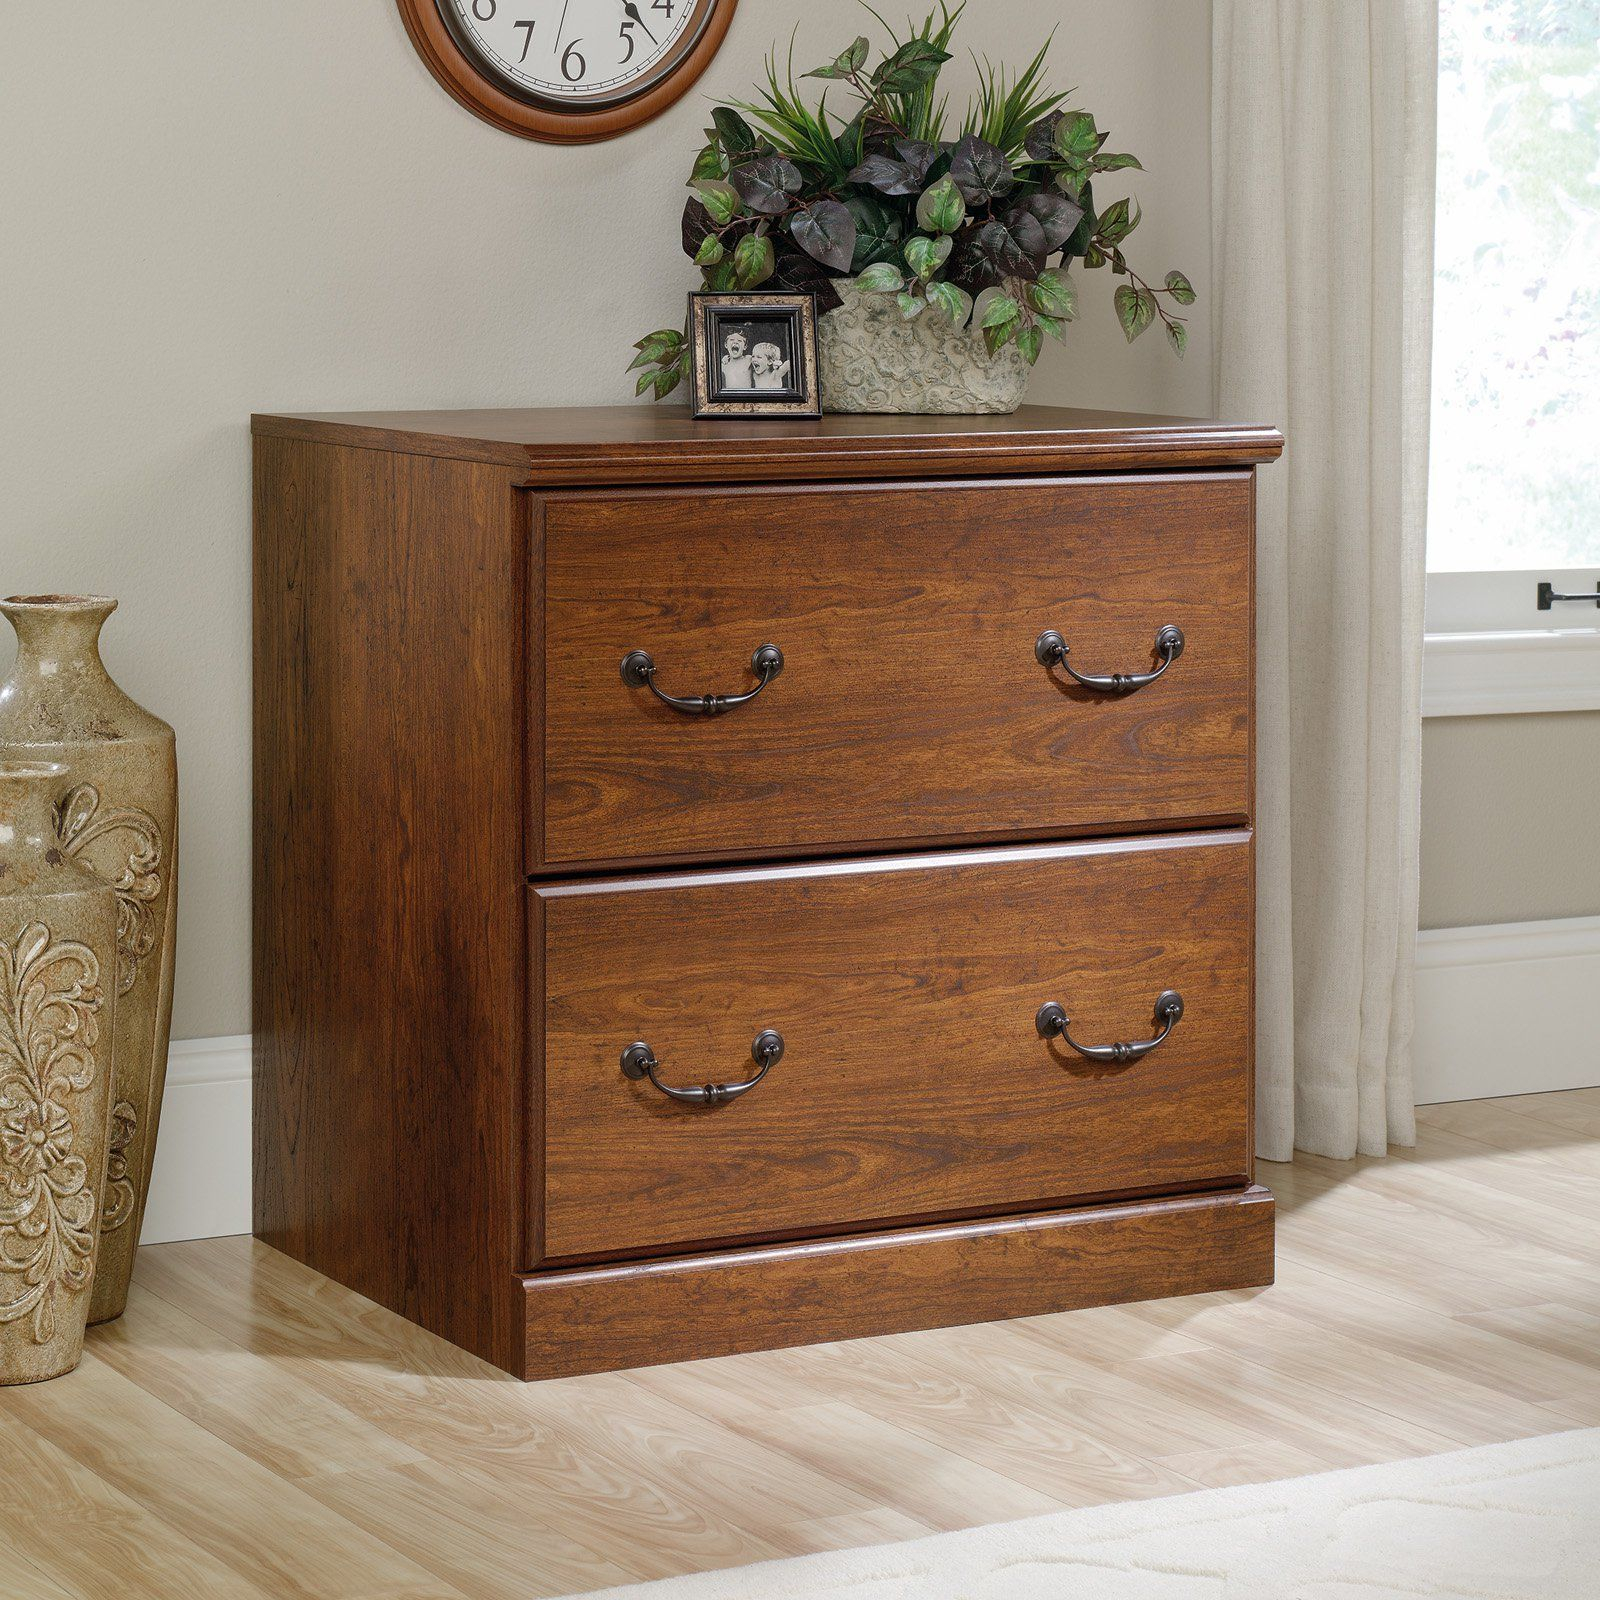 Sauder Orchard Hills Milled Cherry Lateral File Cabinet 418647 throughout proportions 1600 X 1600